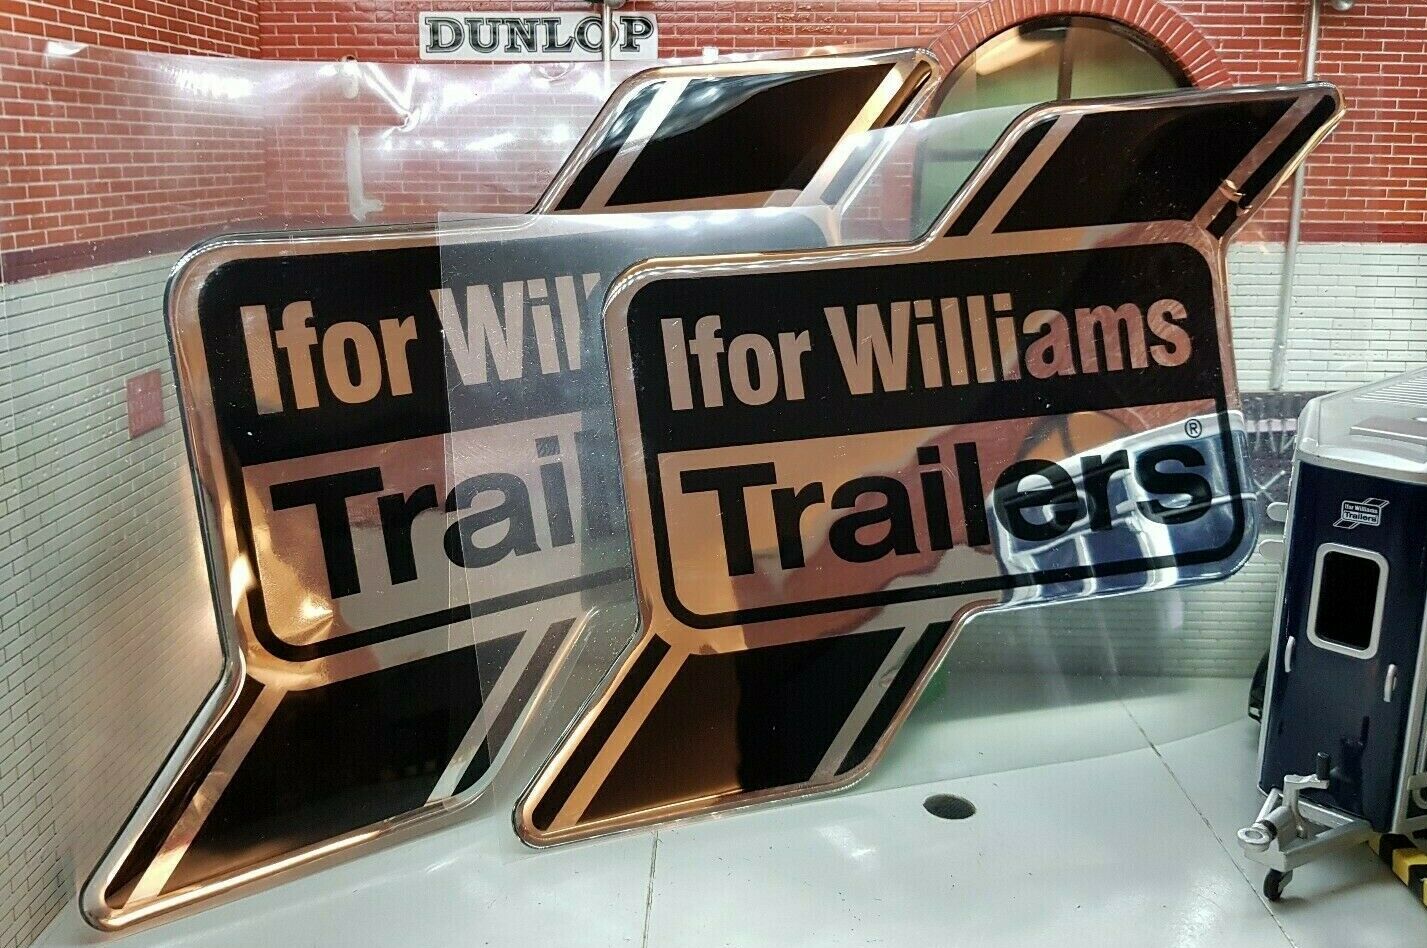 Ifor Williams Horsebox Horse Trailer HB506 HB511 Black Bubble Decal Stickers x2